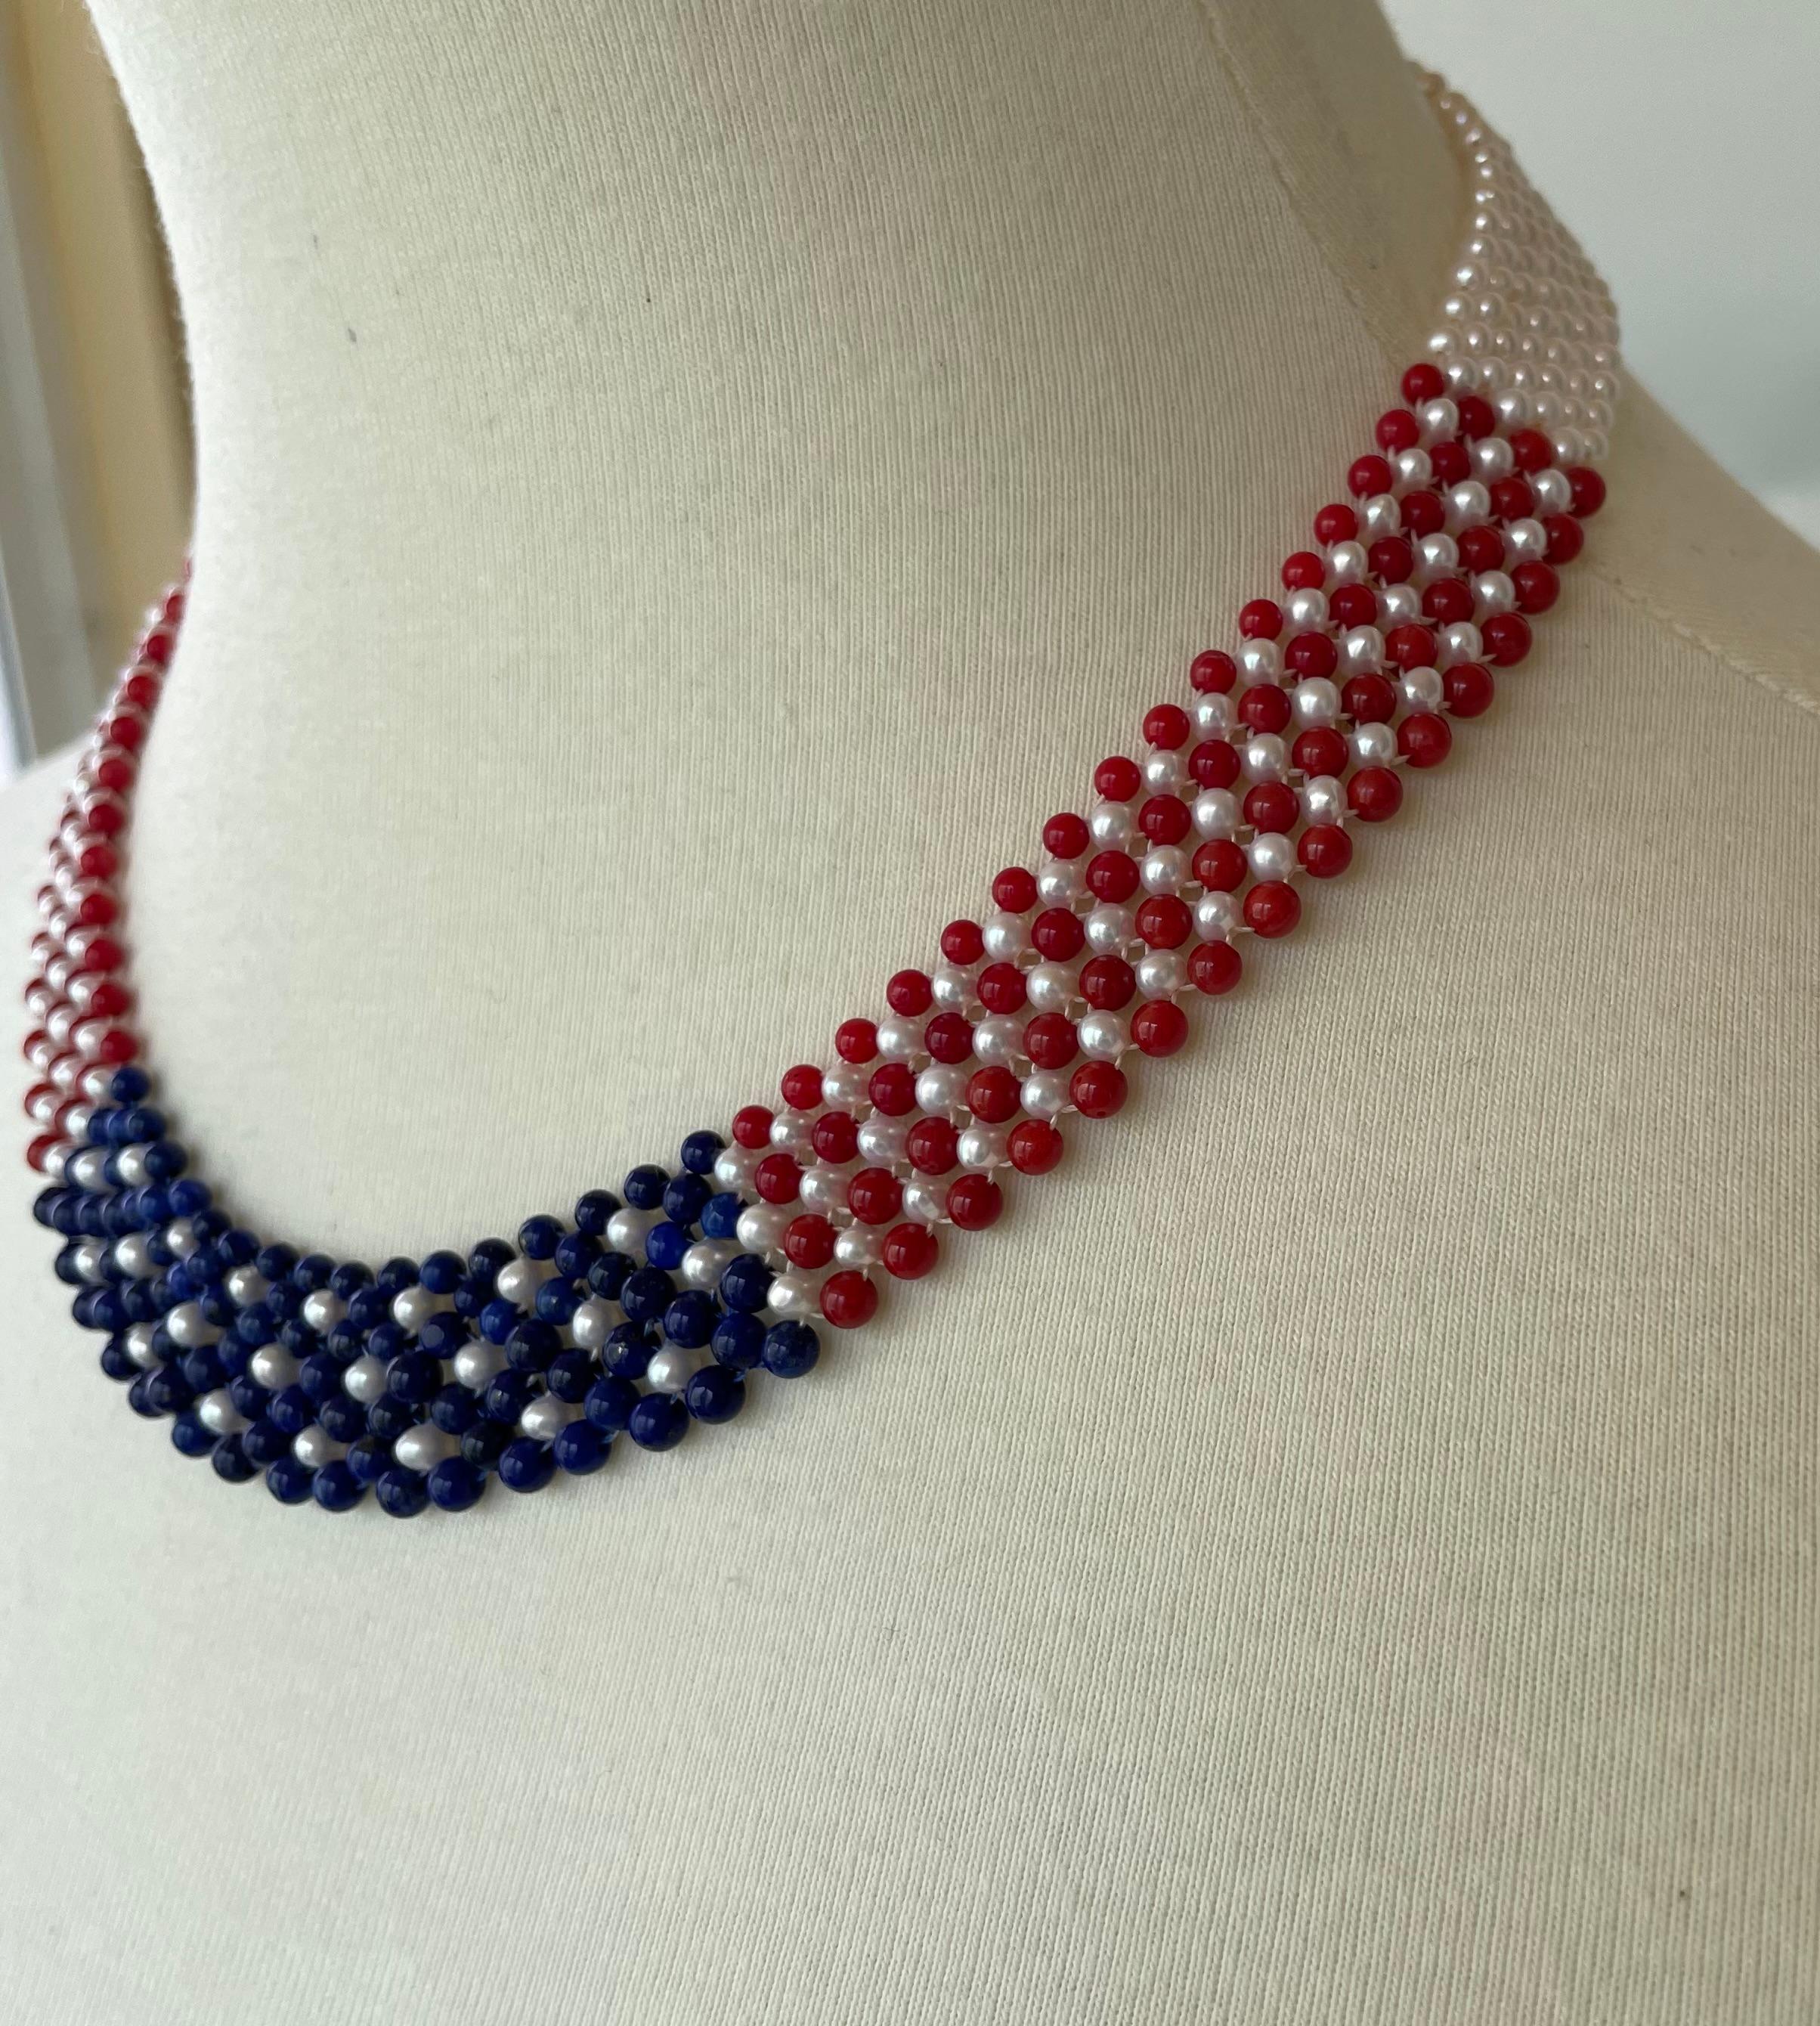 Marina J. American Flag Woven Pearl, Coral, & Lapis Necklace with 14K Yellow G. For Sale 8